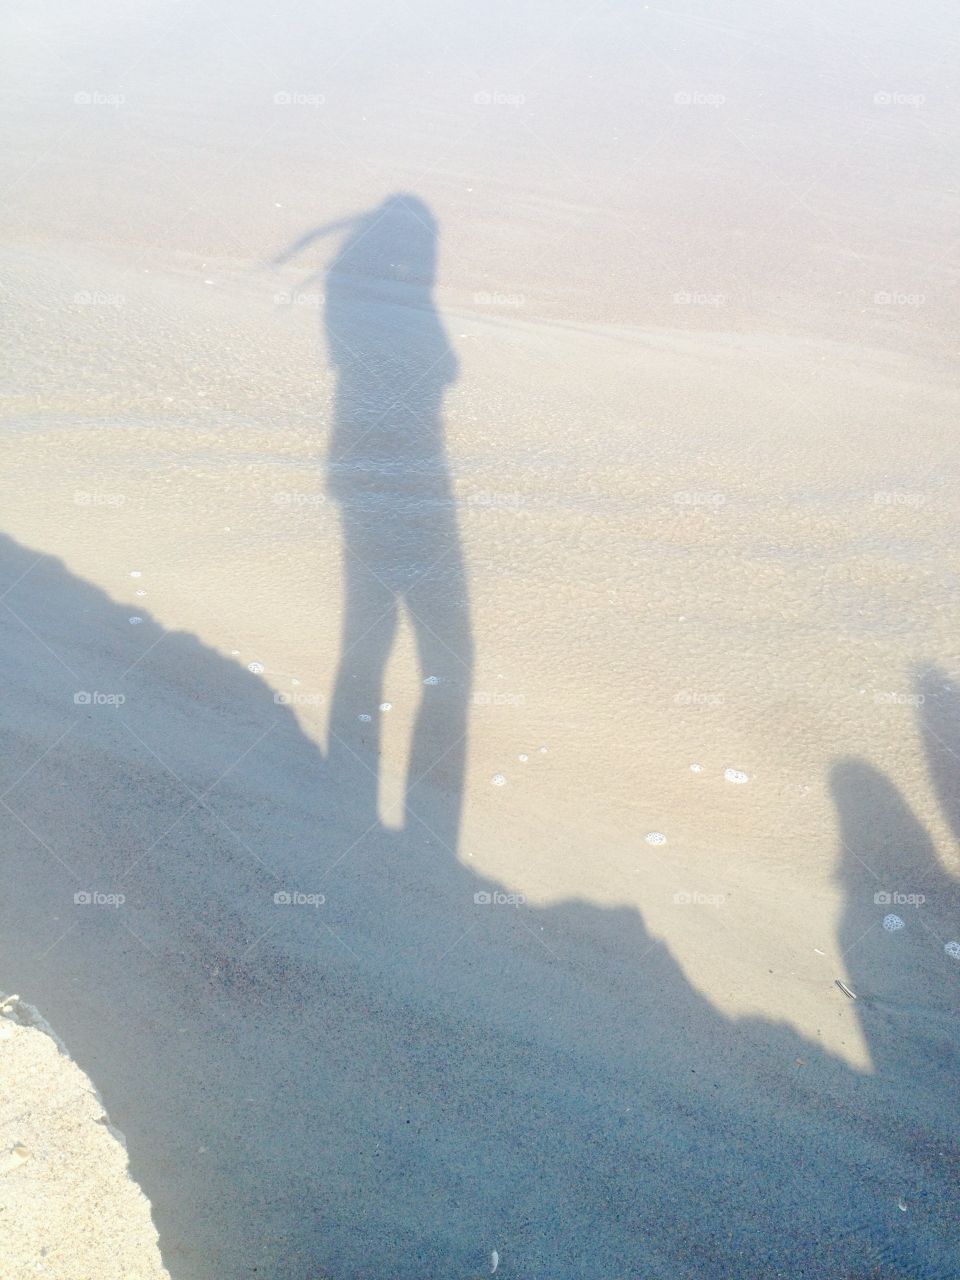 A shadow stands tall on the sands of a beach